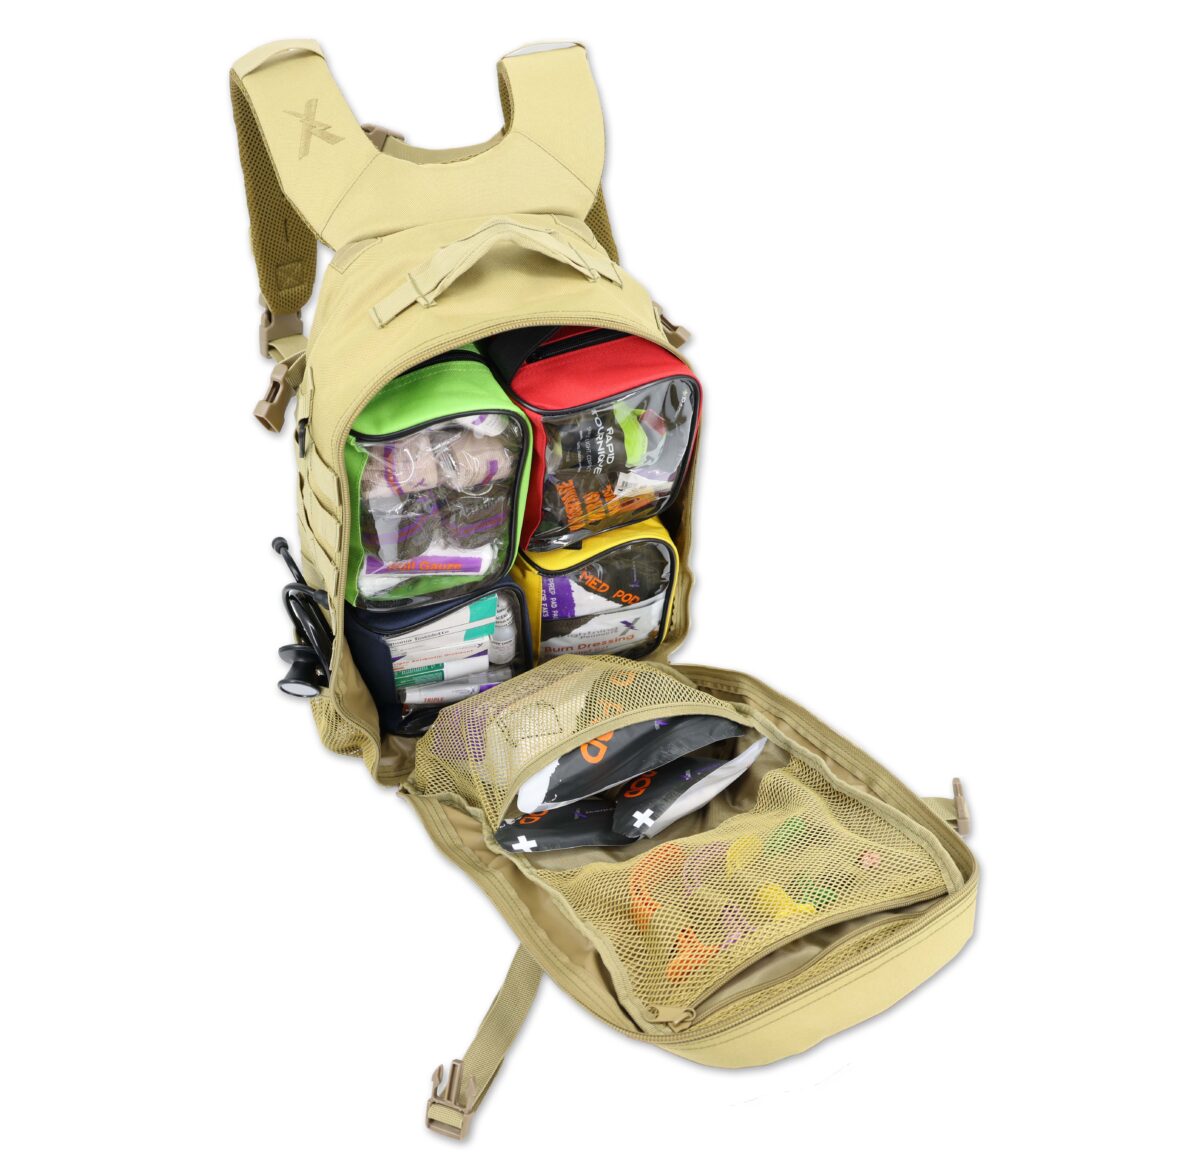 Lightning X premium tacmed molle trauma backpack kit fully stocked gear bag for ems emt first responder w/ first aid supplies including quikclot, tourniquet, israeli bandage, nasal airways and professional medical supplies - TAN